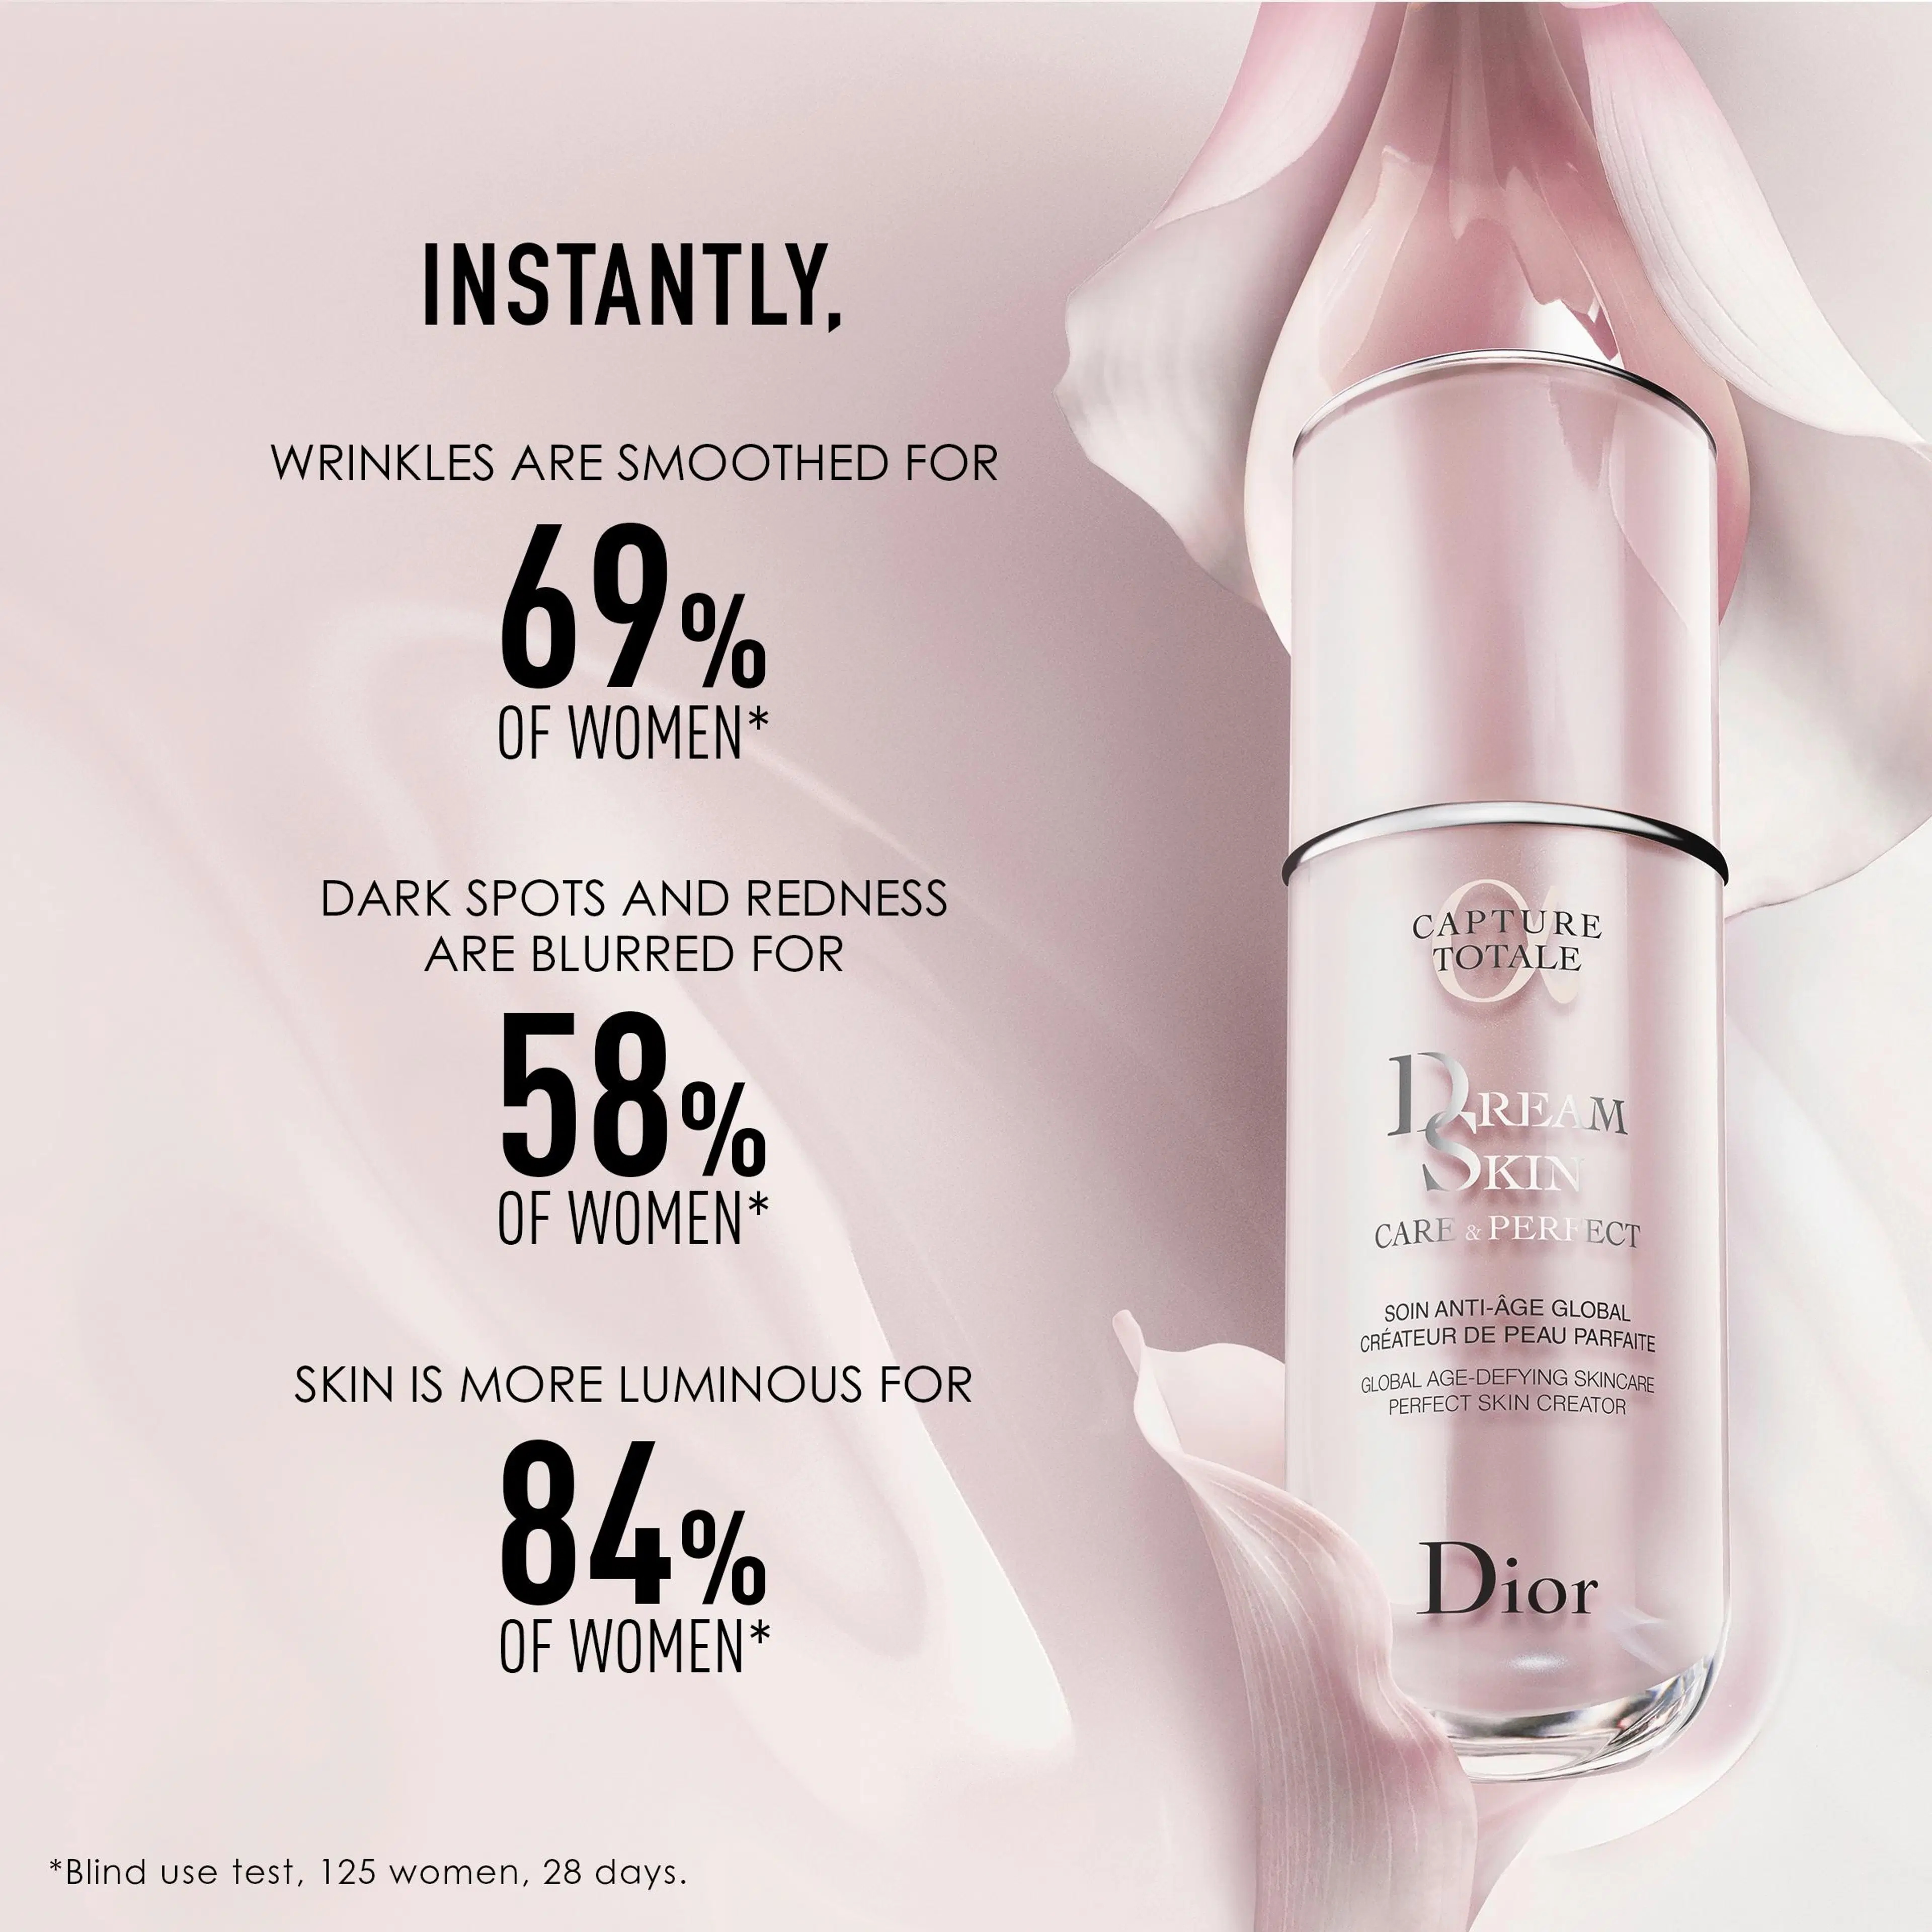 DIOR Capture Dreamskin Care & Perfect Global Age-Defying Skincare voide 75ml